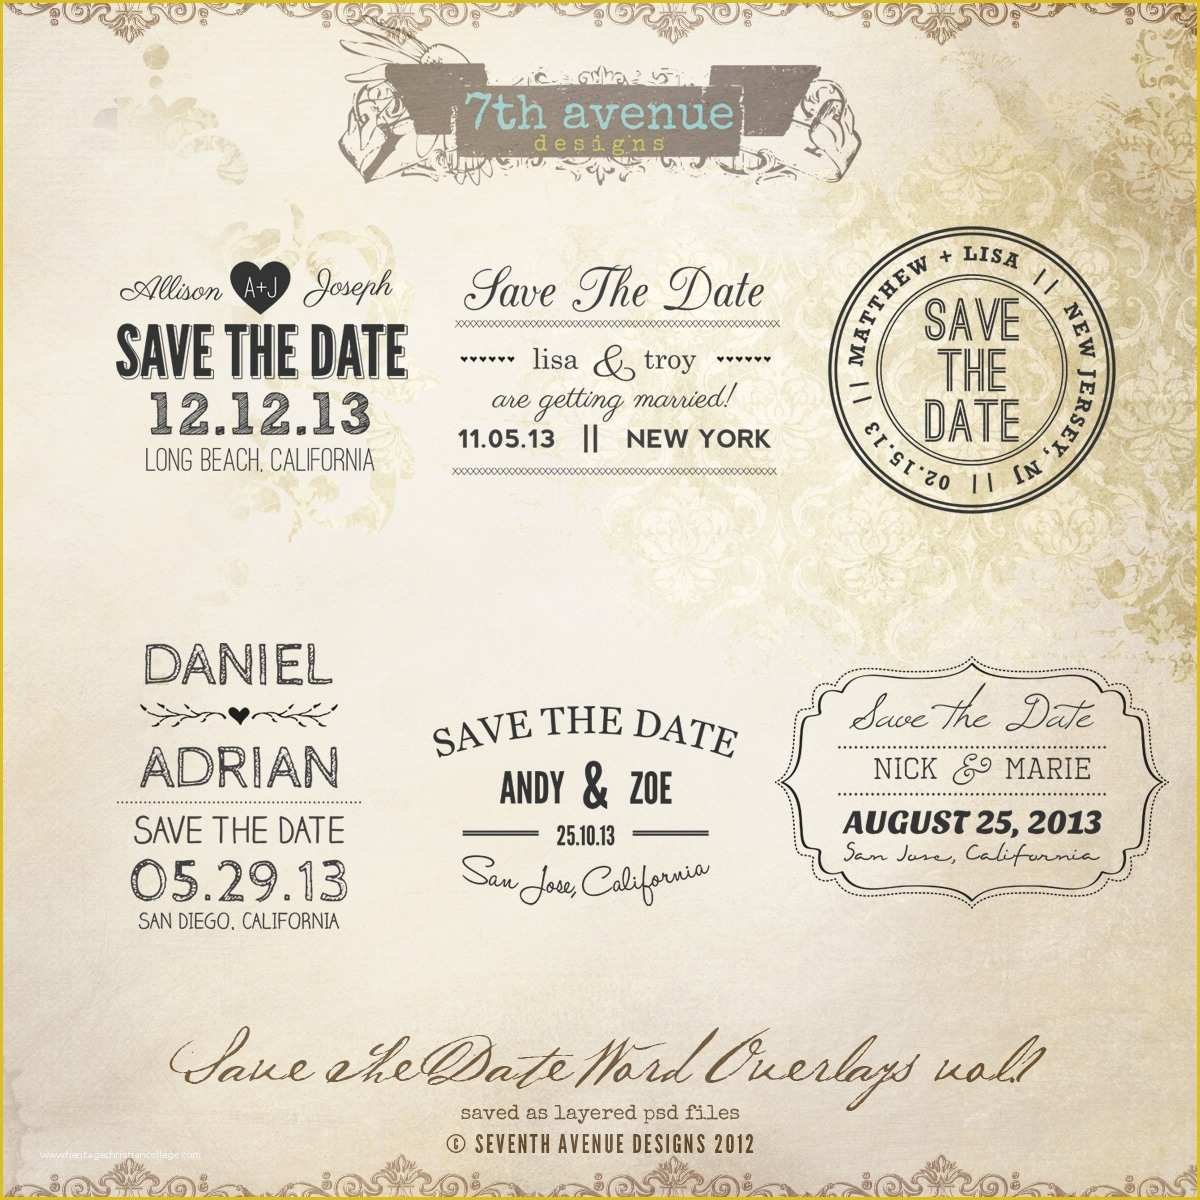 Save the Date Templates Free Online Of Senior Card Templates No 2 [senior2] $4 00 7thavenue